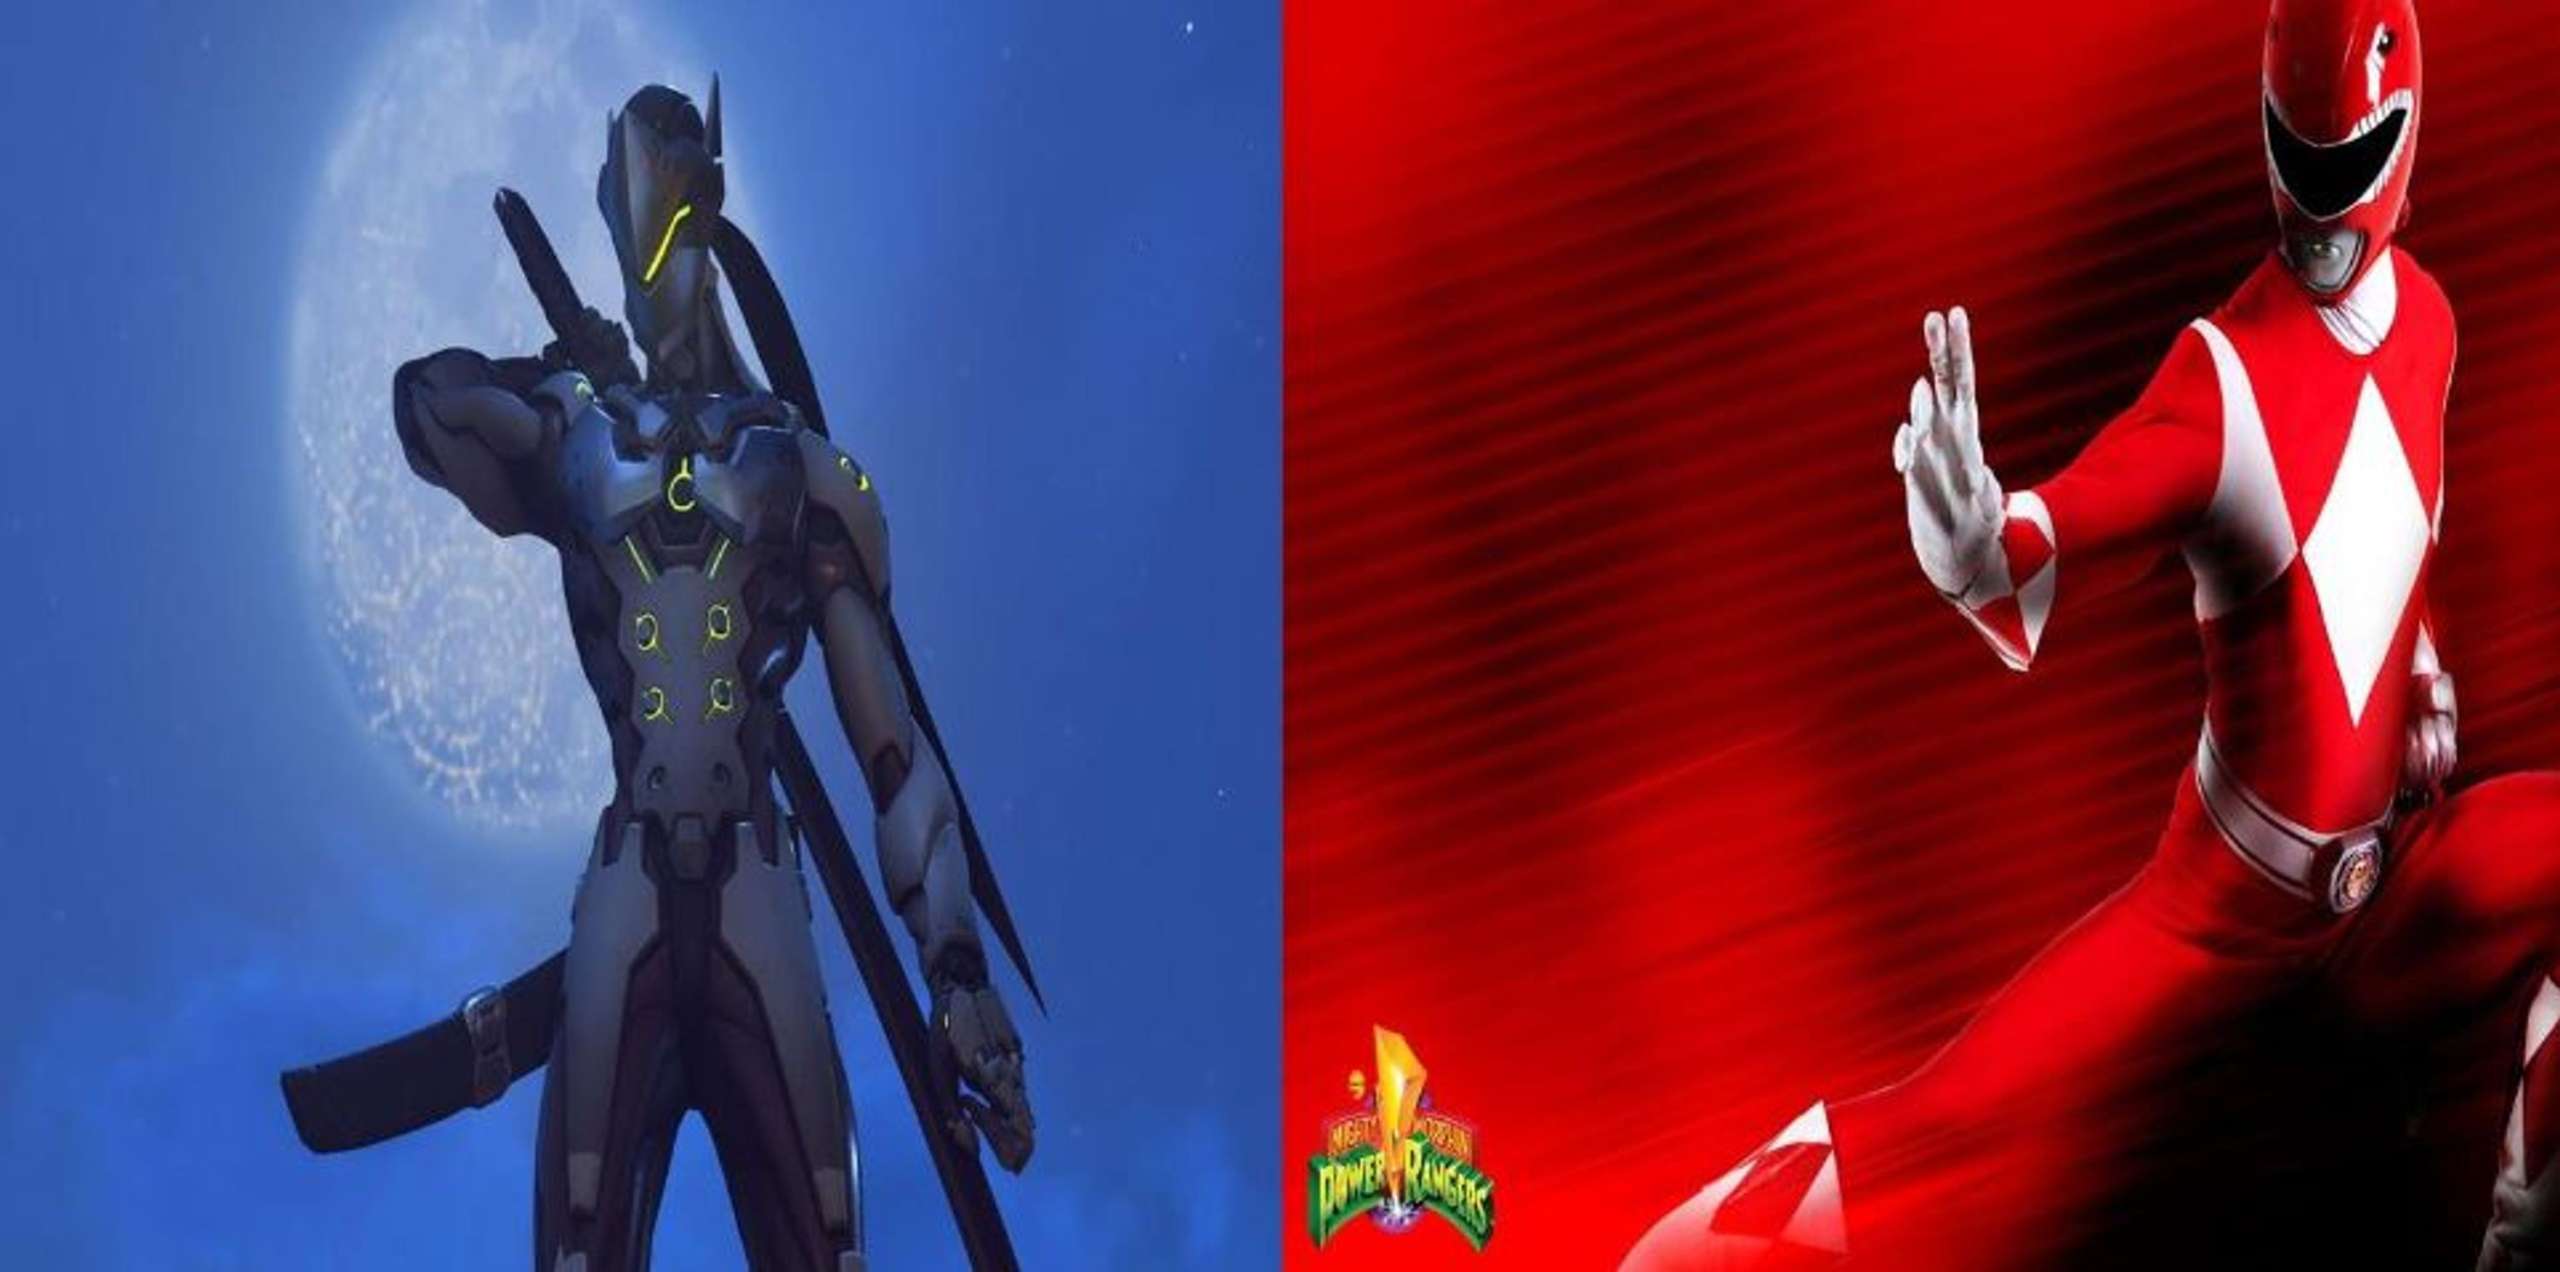 A Crimson Power Ranger May Be Seen In The New Overwatch Genji Skin